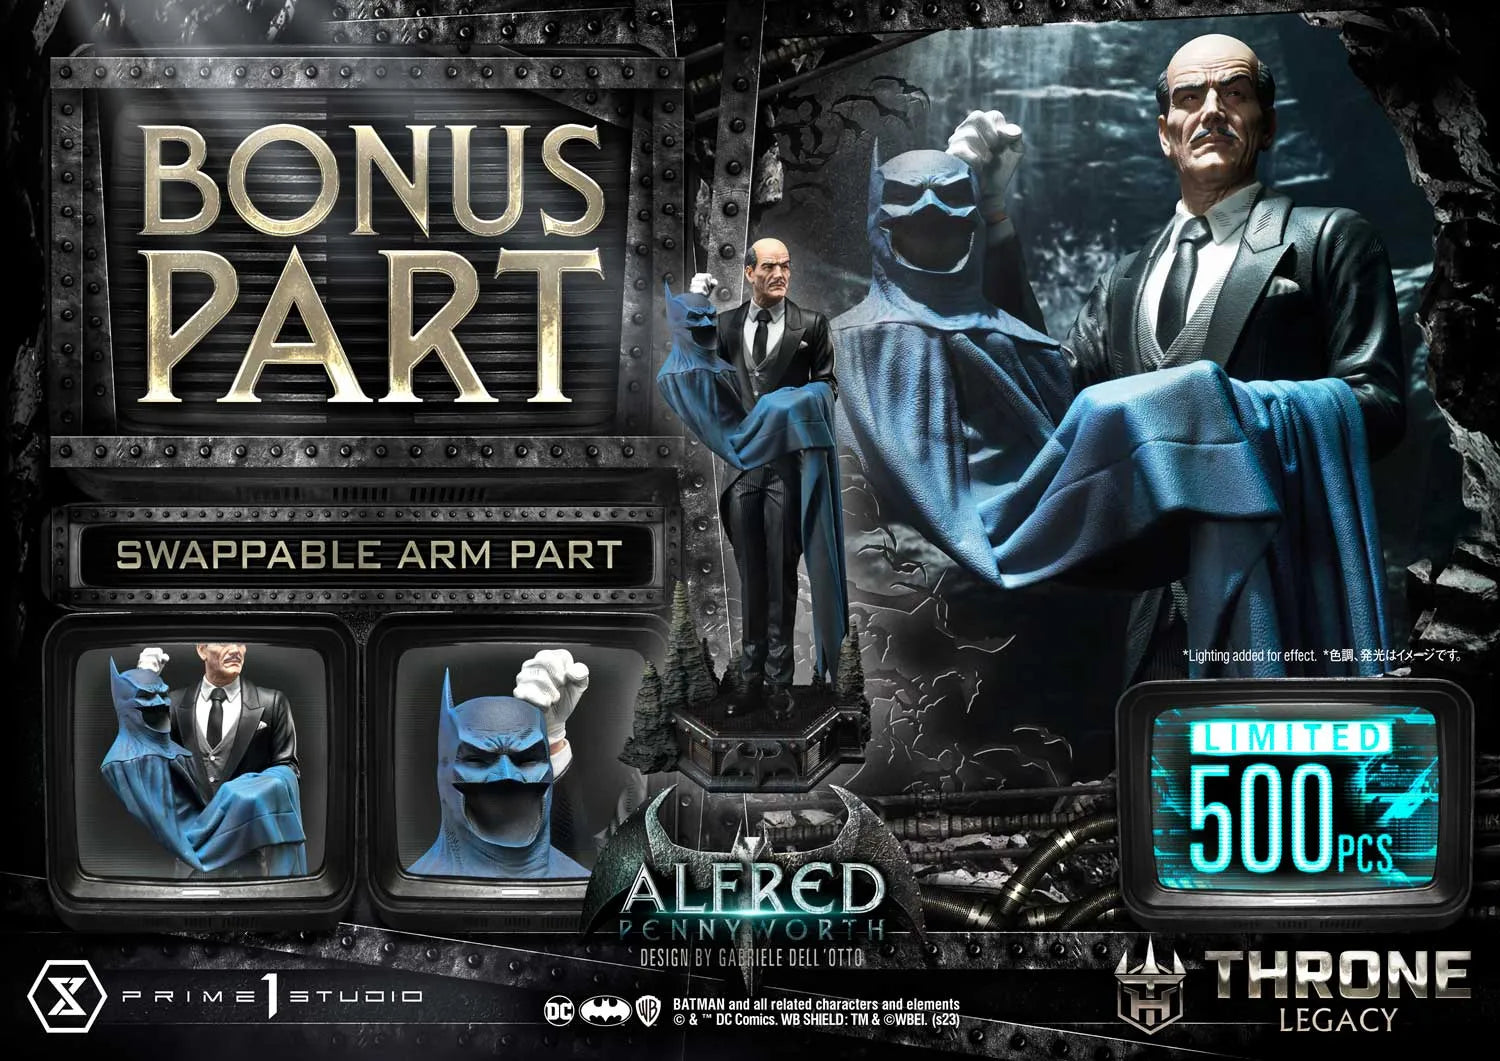 Alfred Pennyworth Throne Legacy Statue By Prime 1 Studios